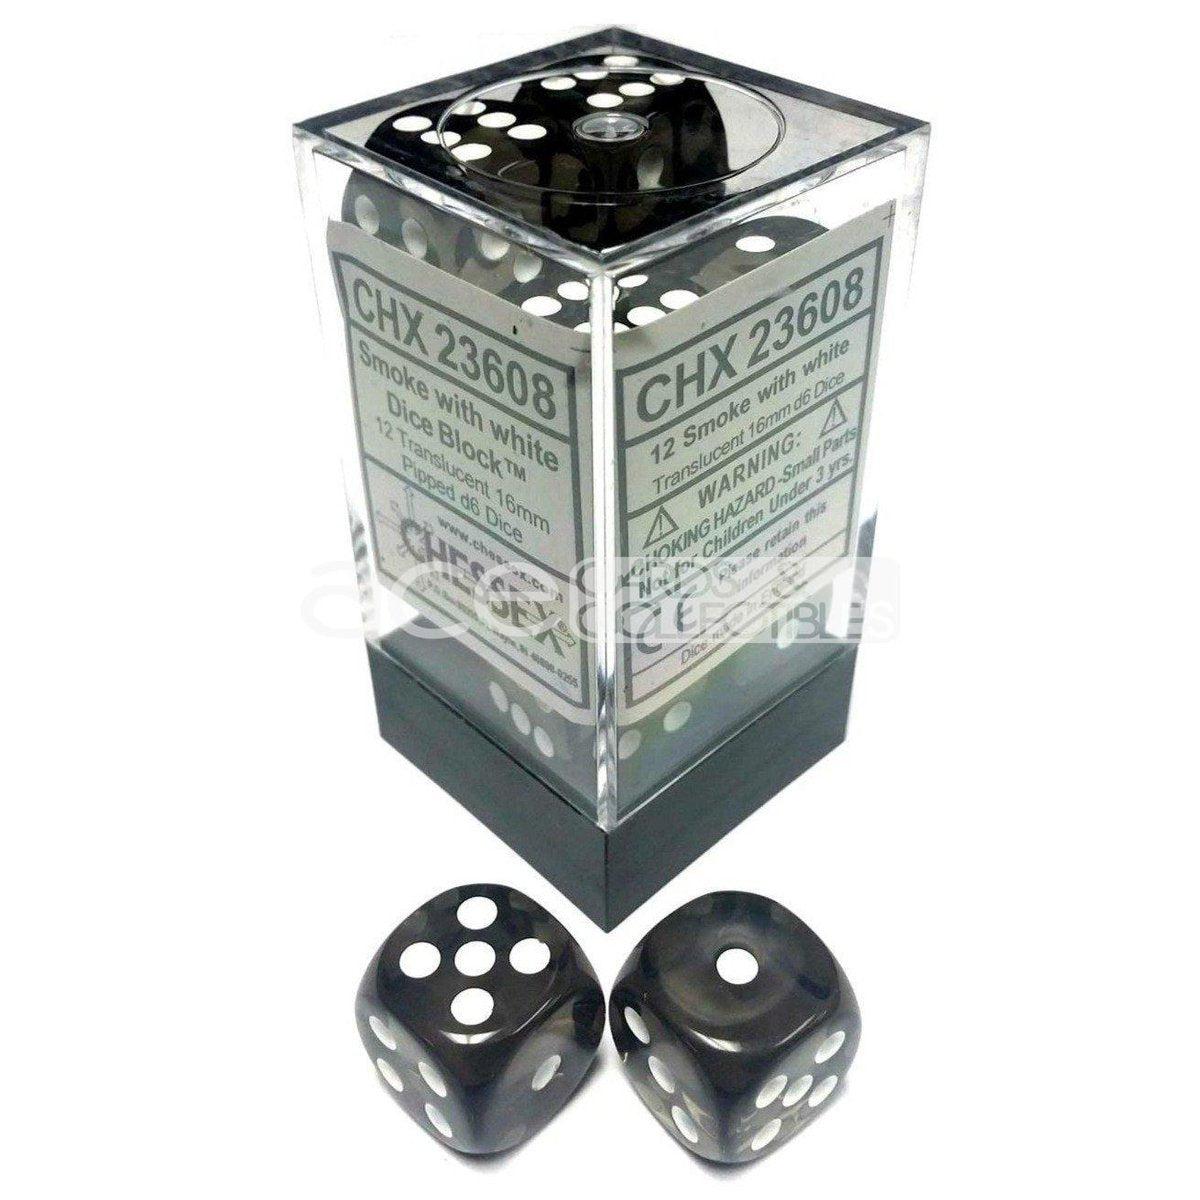 Chessex Translucent 16mm d6 12pcs Dice (Smoke/White) [CHX23608]-Chessex-Ace Cards & Collectibles